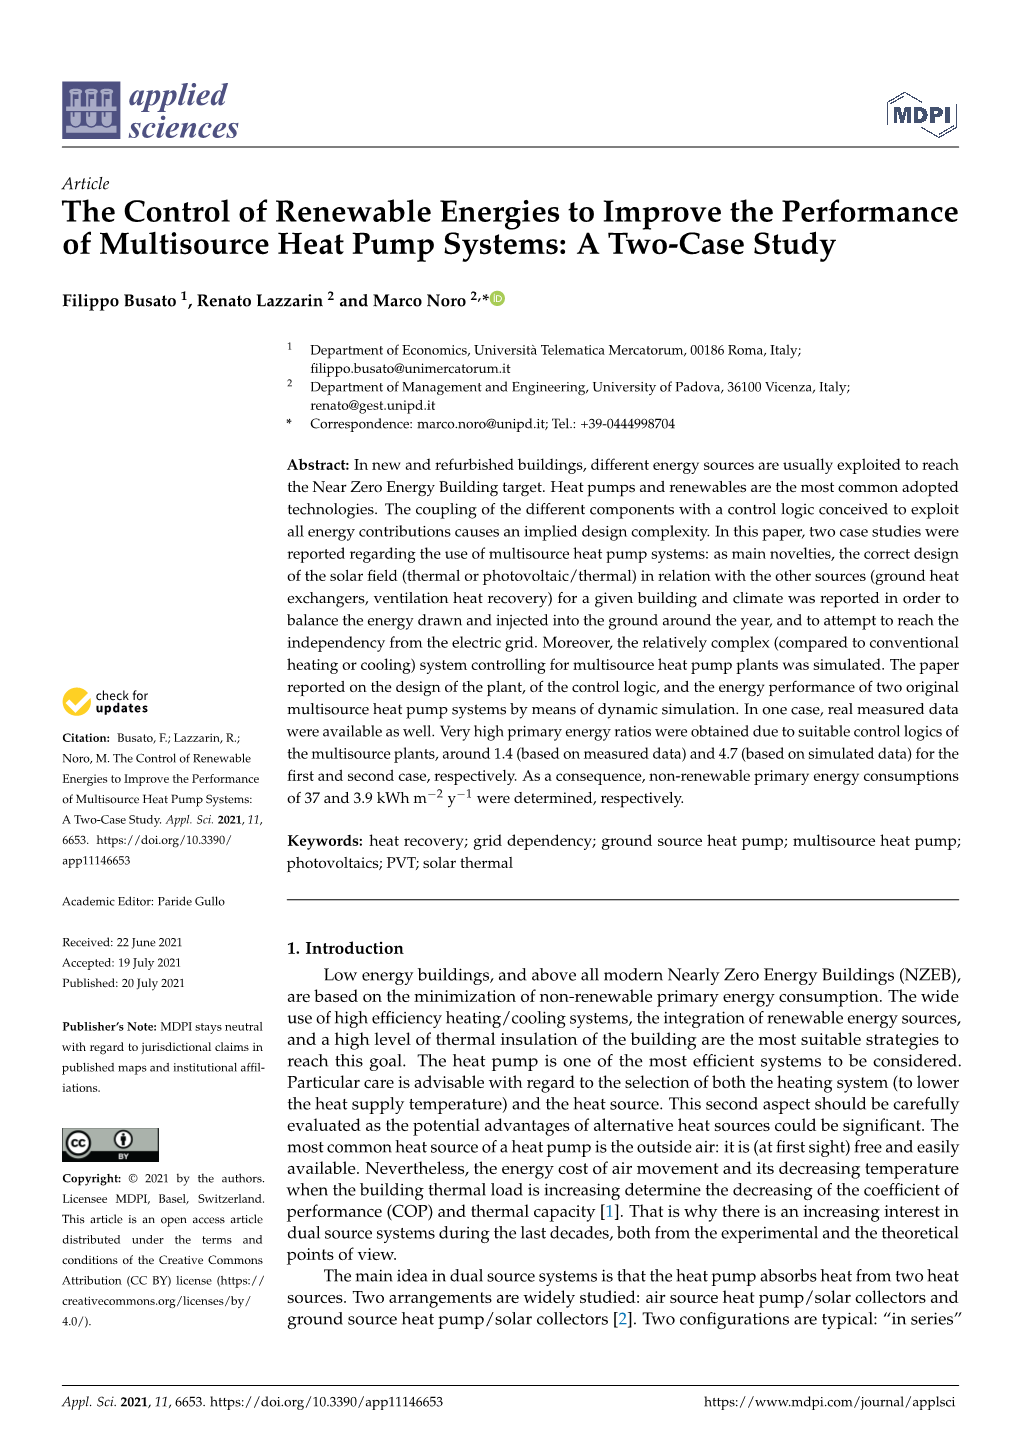 The Control of Renewable Energies to Improve the Performance of Multisource Heat Pump Systems: a Two-Case Study